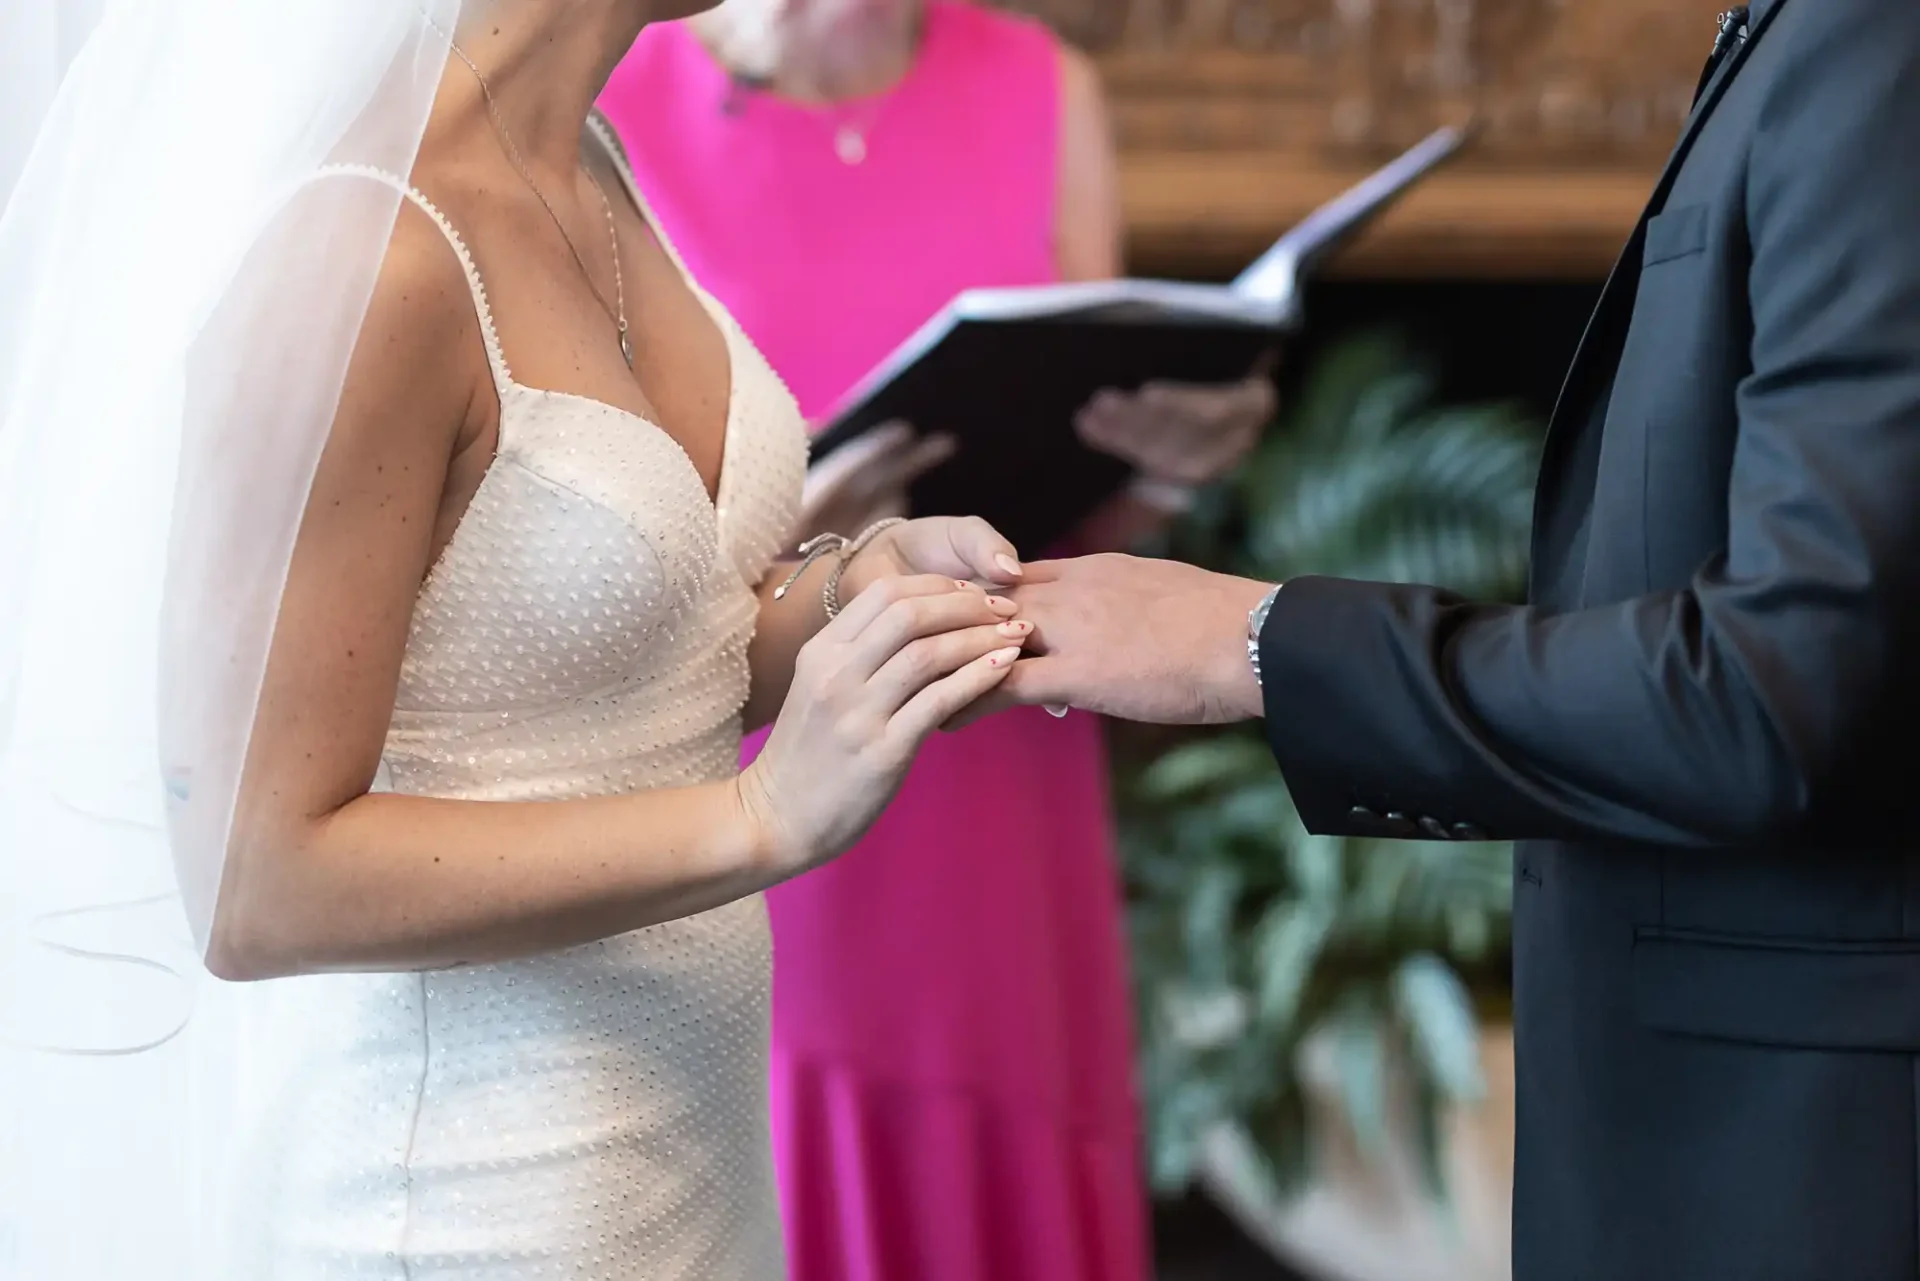 A bride in a white beaded dress and veil and a groom in a black suit exchange rings during a wedding ceremony, with an officiant in pink visible in the background.